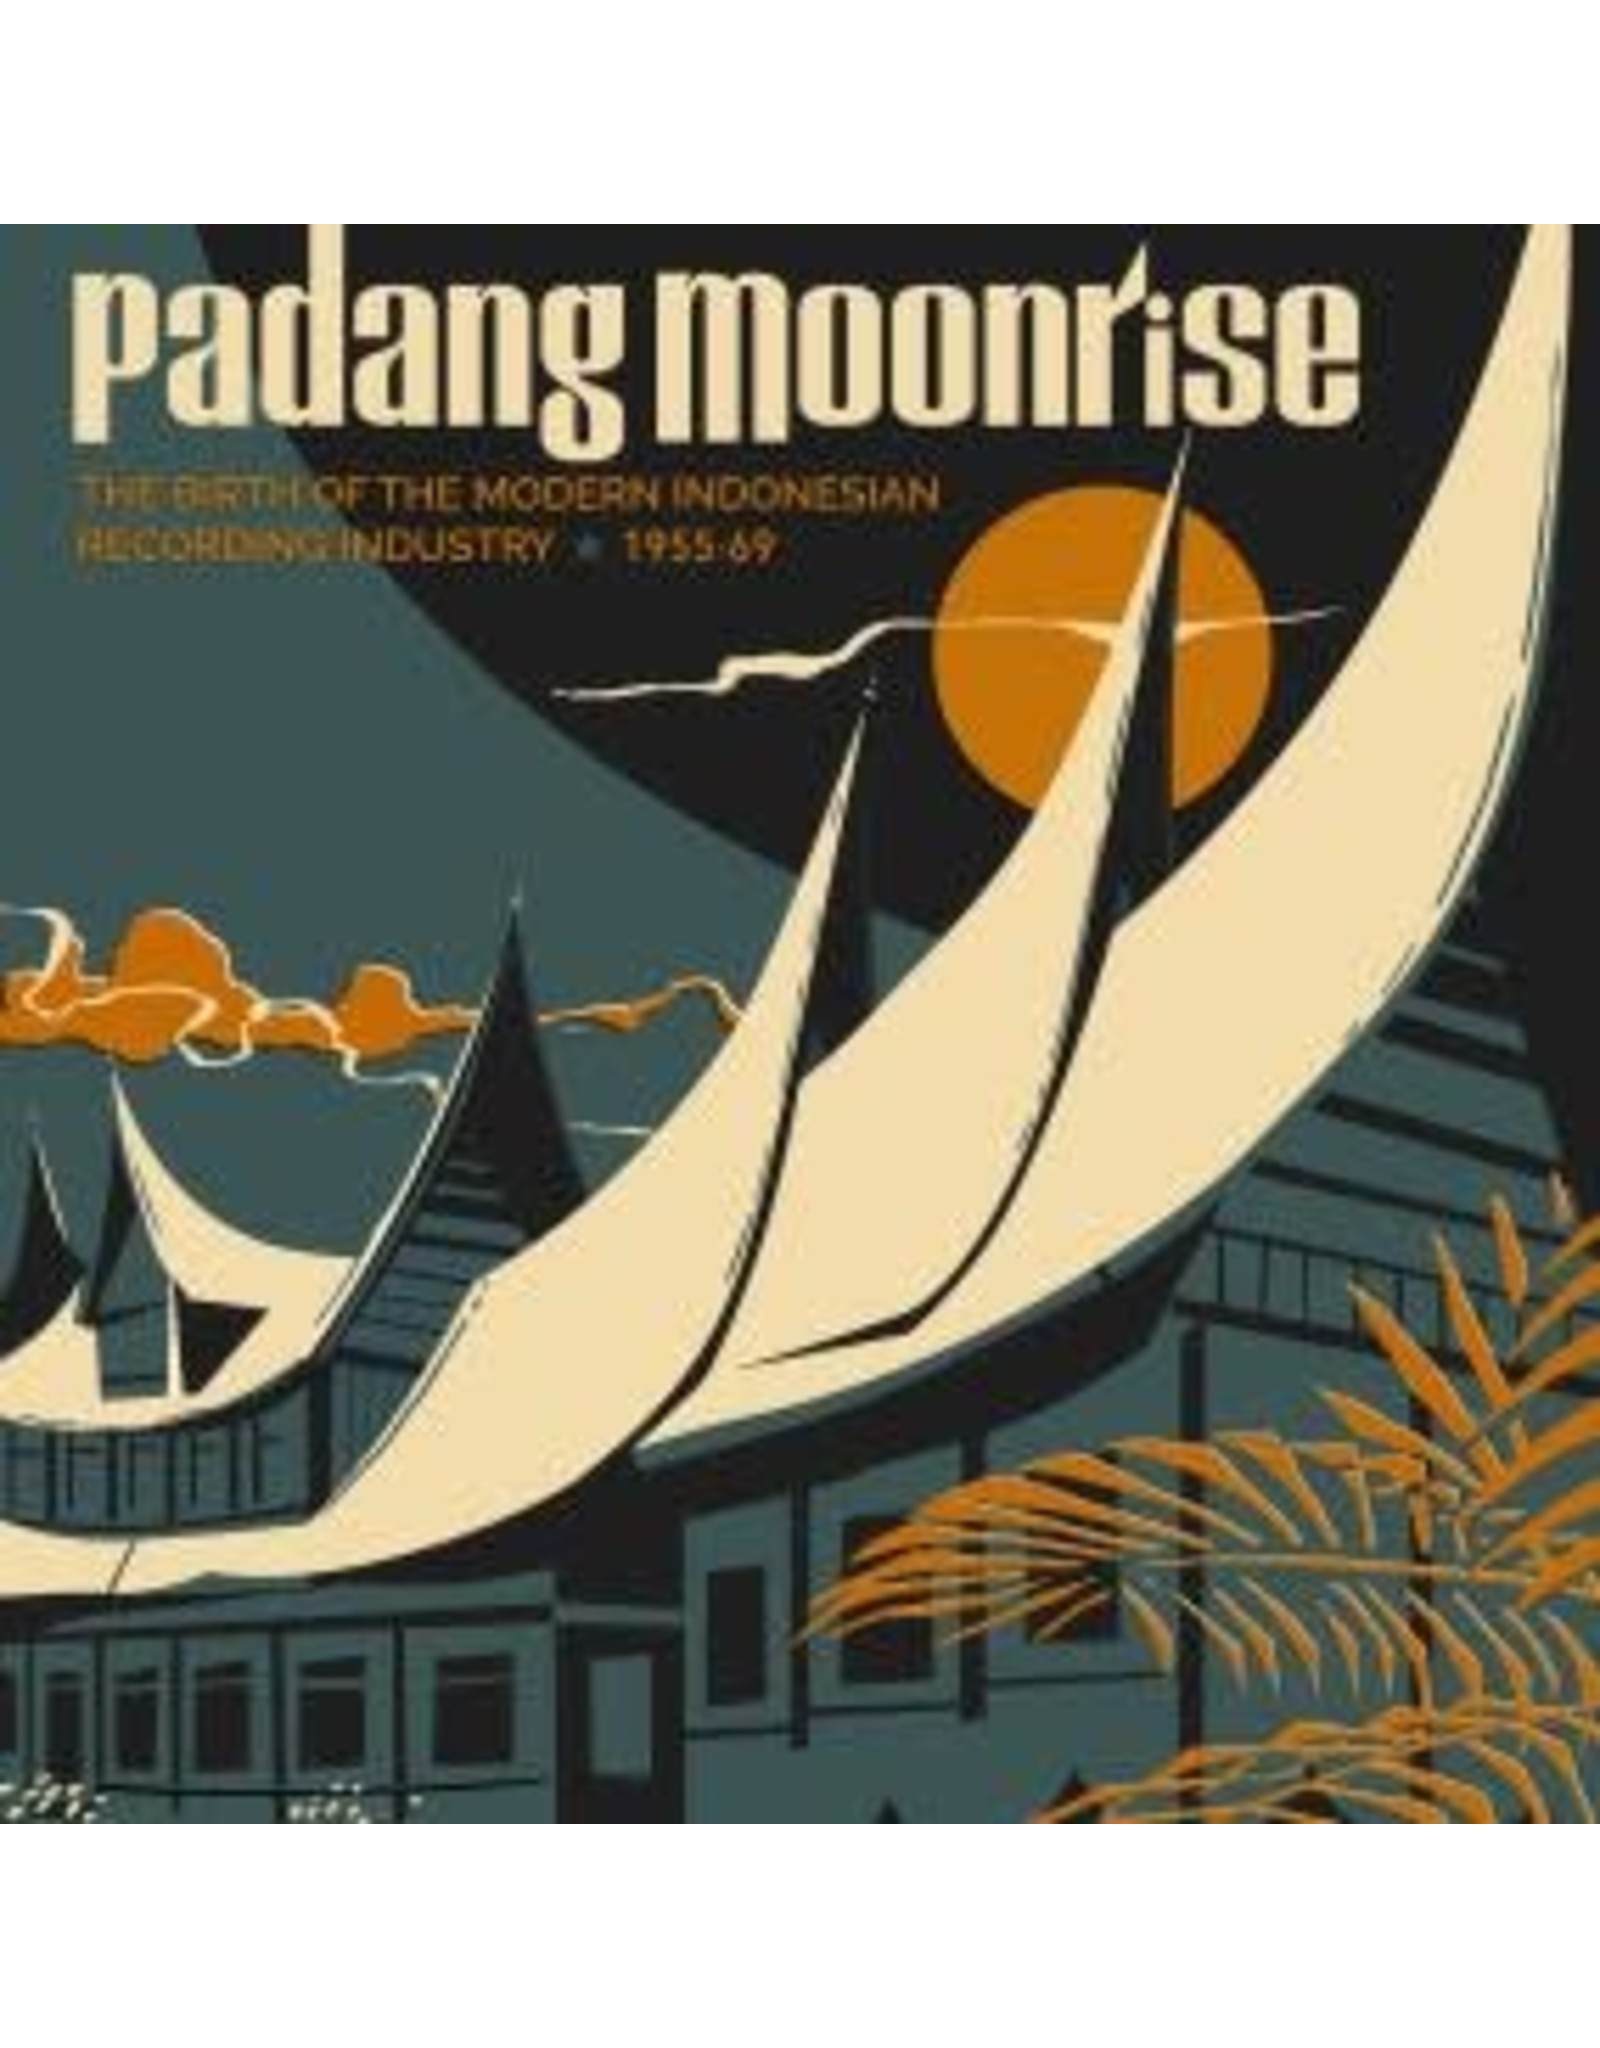 Soundways Various: Padang Moonrise: The Birth of the Modern Indonesian Recording Industry (1955-69) LP